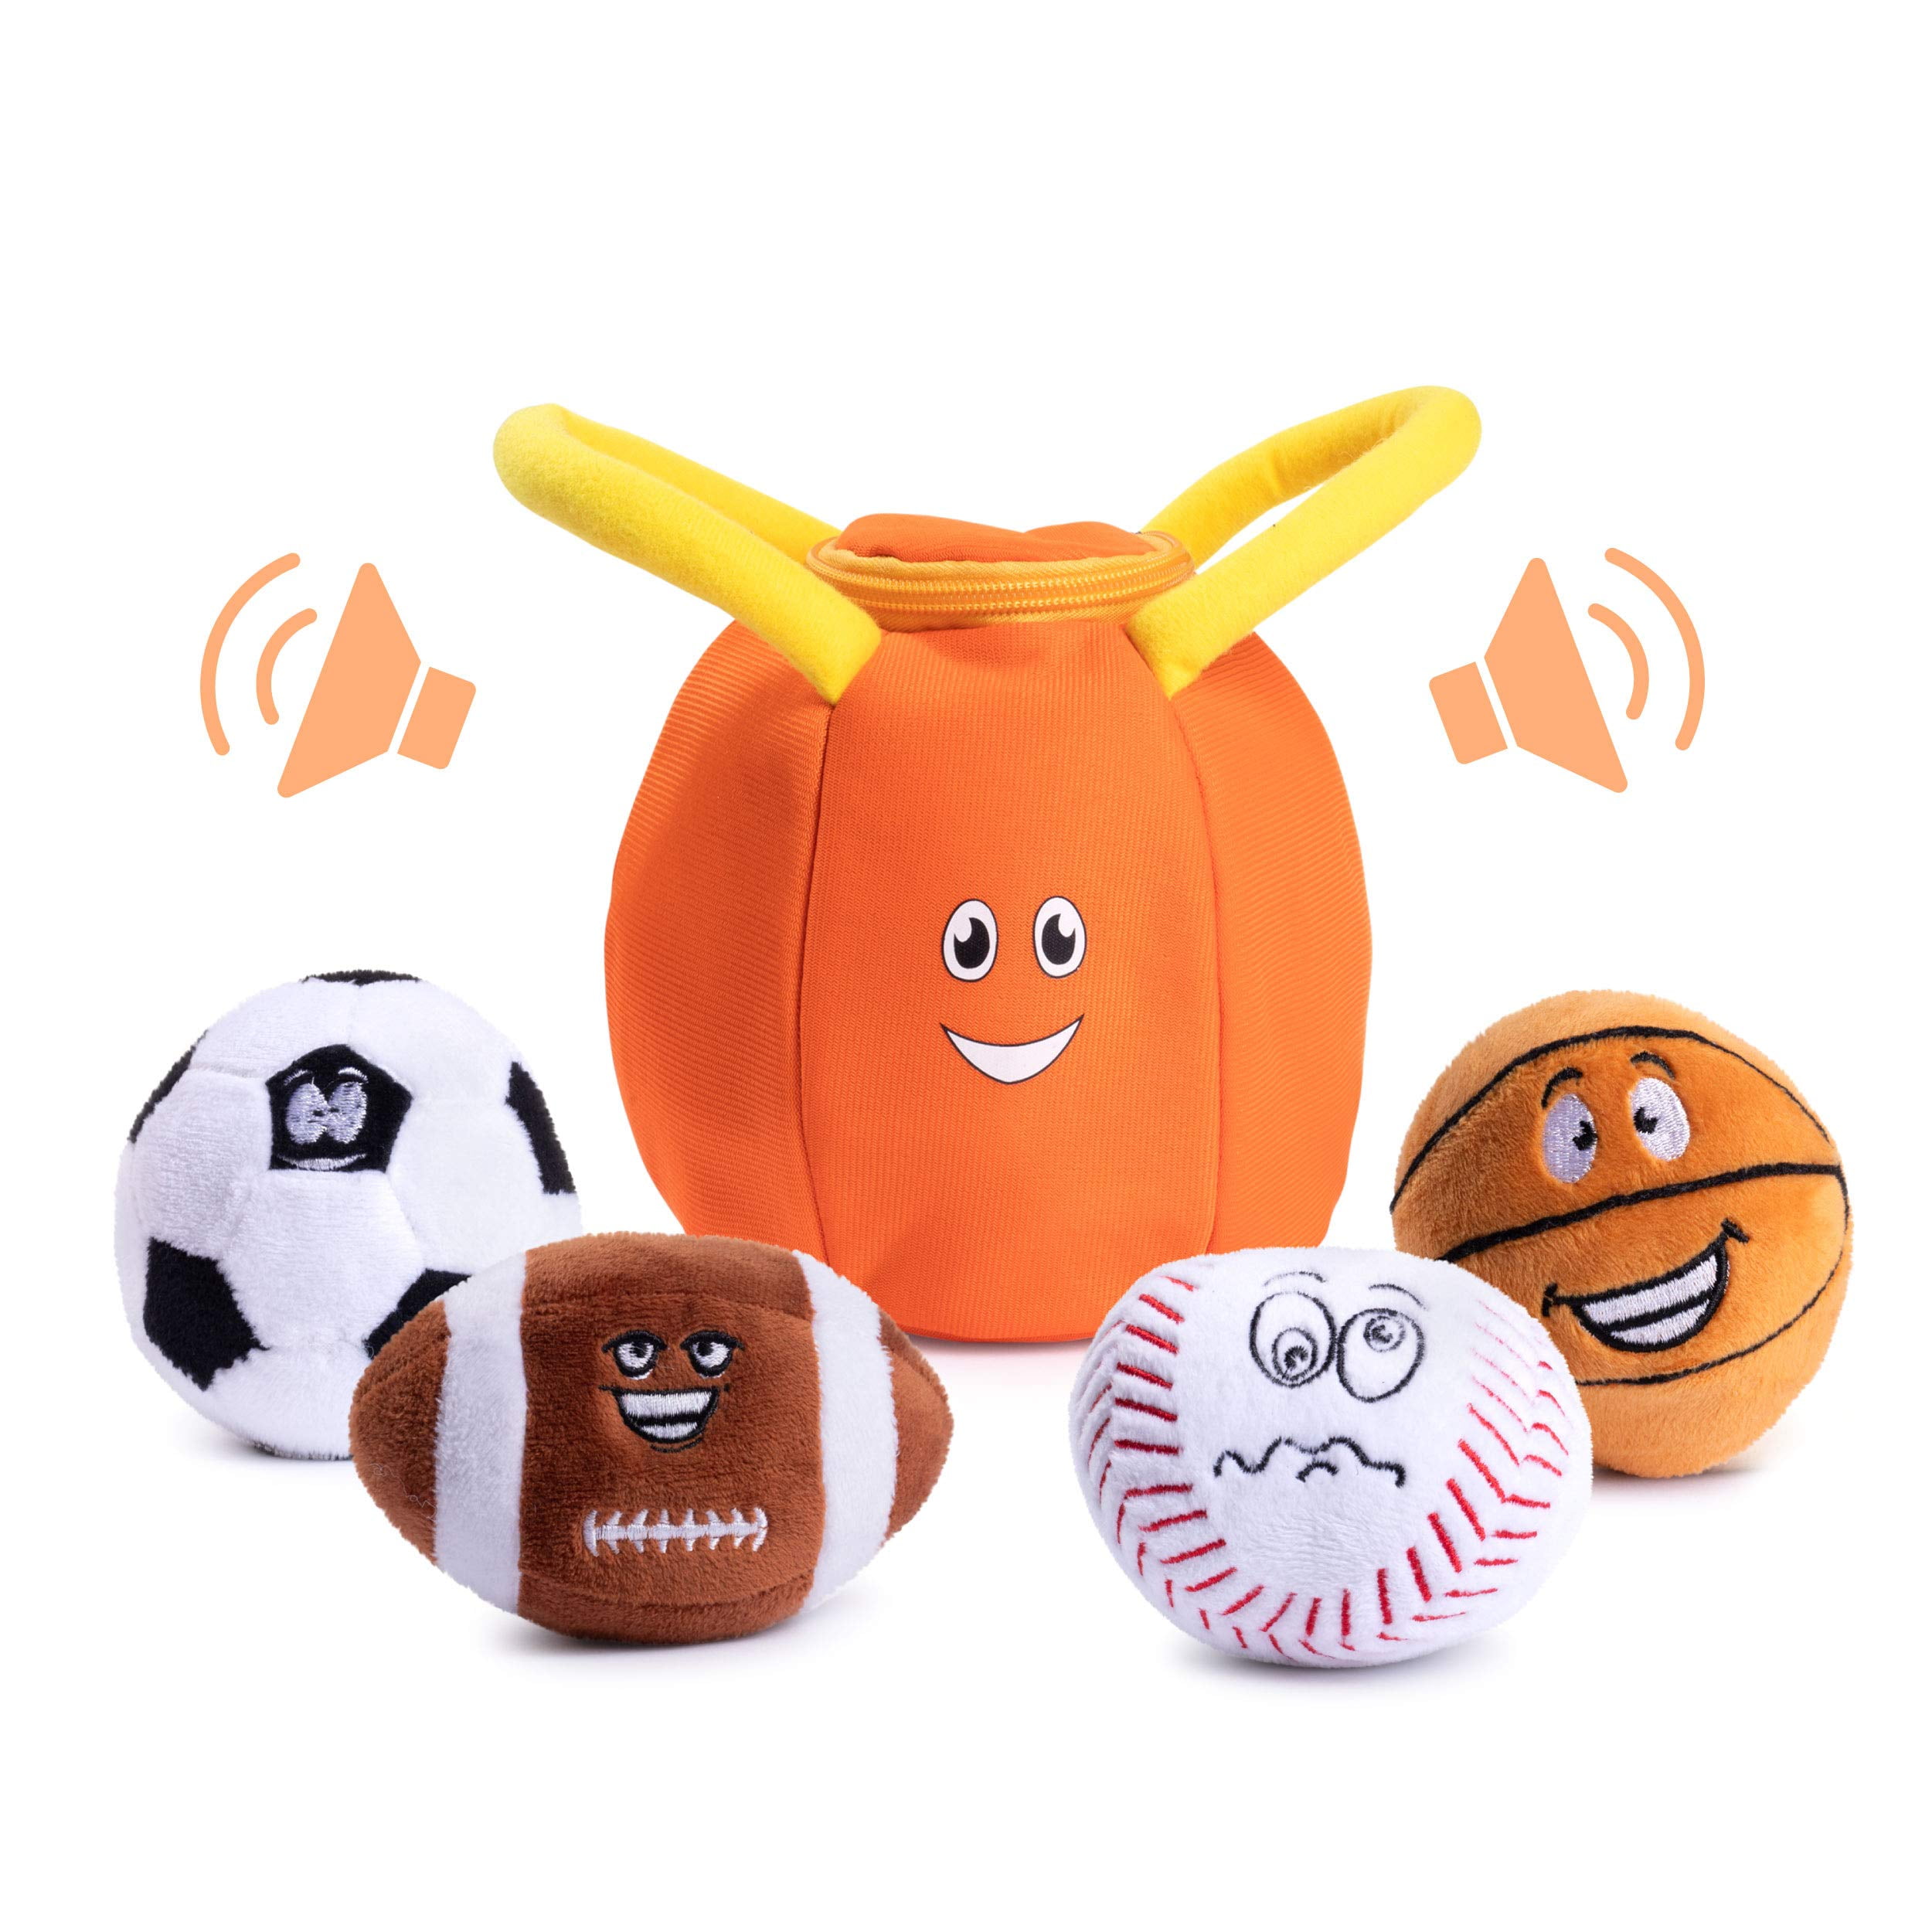 VERCART Baseball Toy Plush Fluffy Stuffed Sports Throw Ball Soft Durable Sports Baseball Toy Gift for Children Room Decoration Doll White 3 Inches 